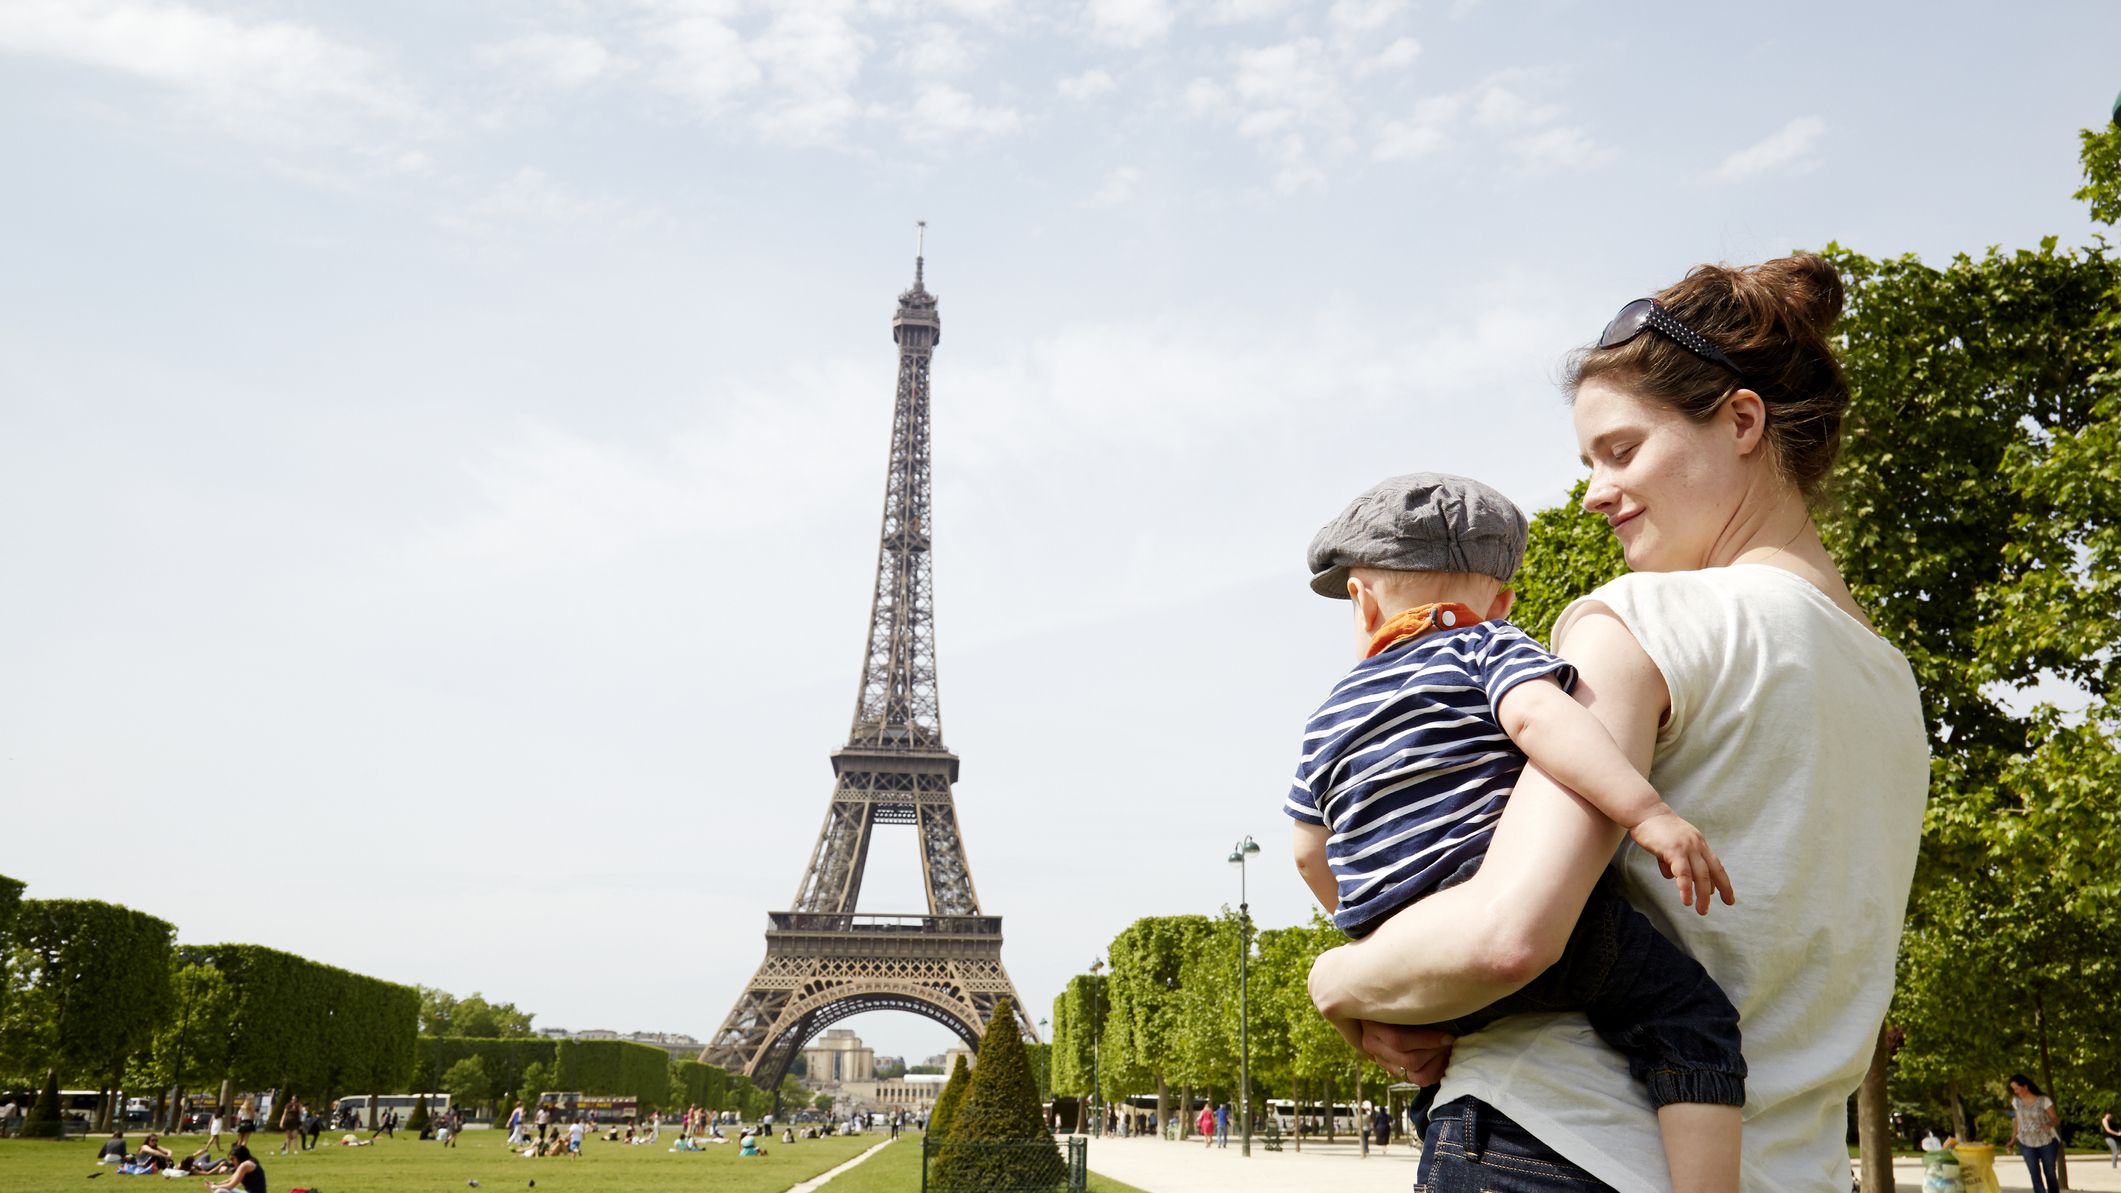 https://hips.hearstapps.com/hmg-prod/images/mom-and-baby-in-front-of-eiffel-tower-in-paris-royalty-free-image-1687458181.jpg?crop=1xw:0.84375xh;center,top